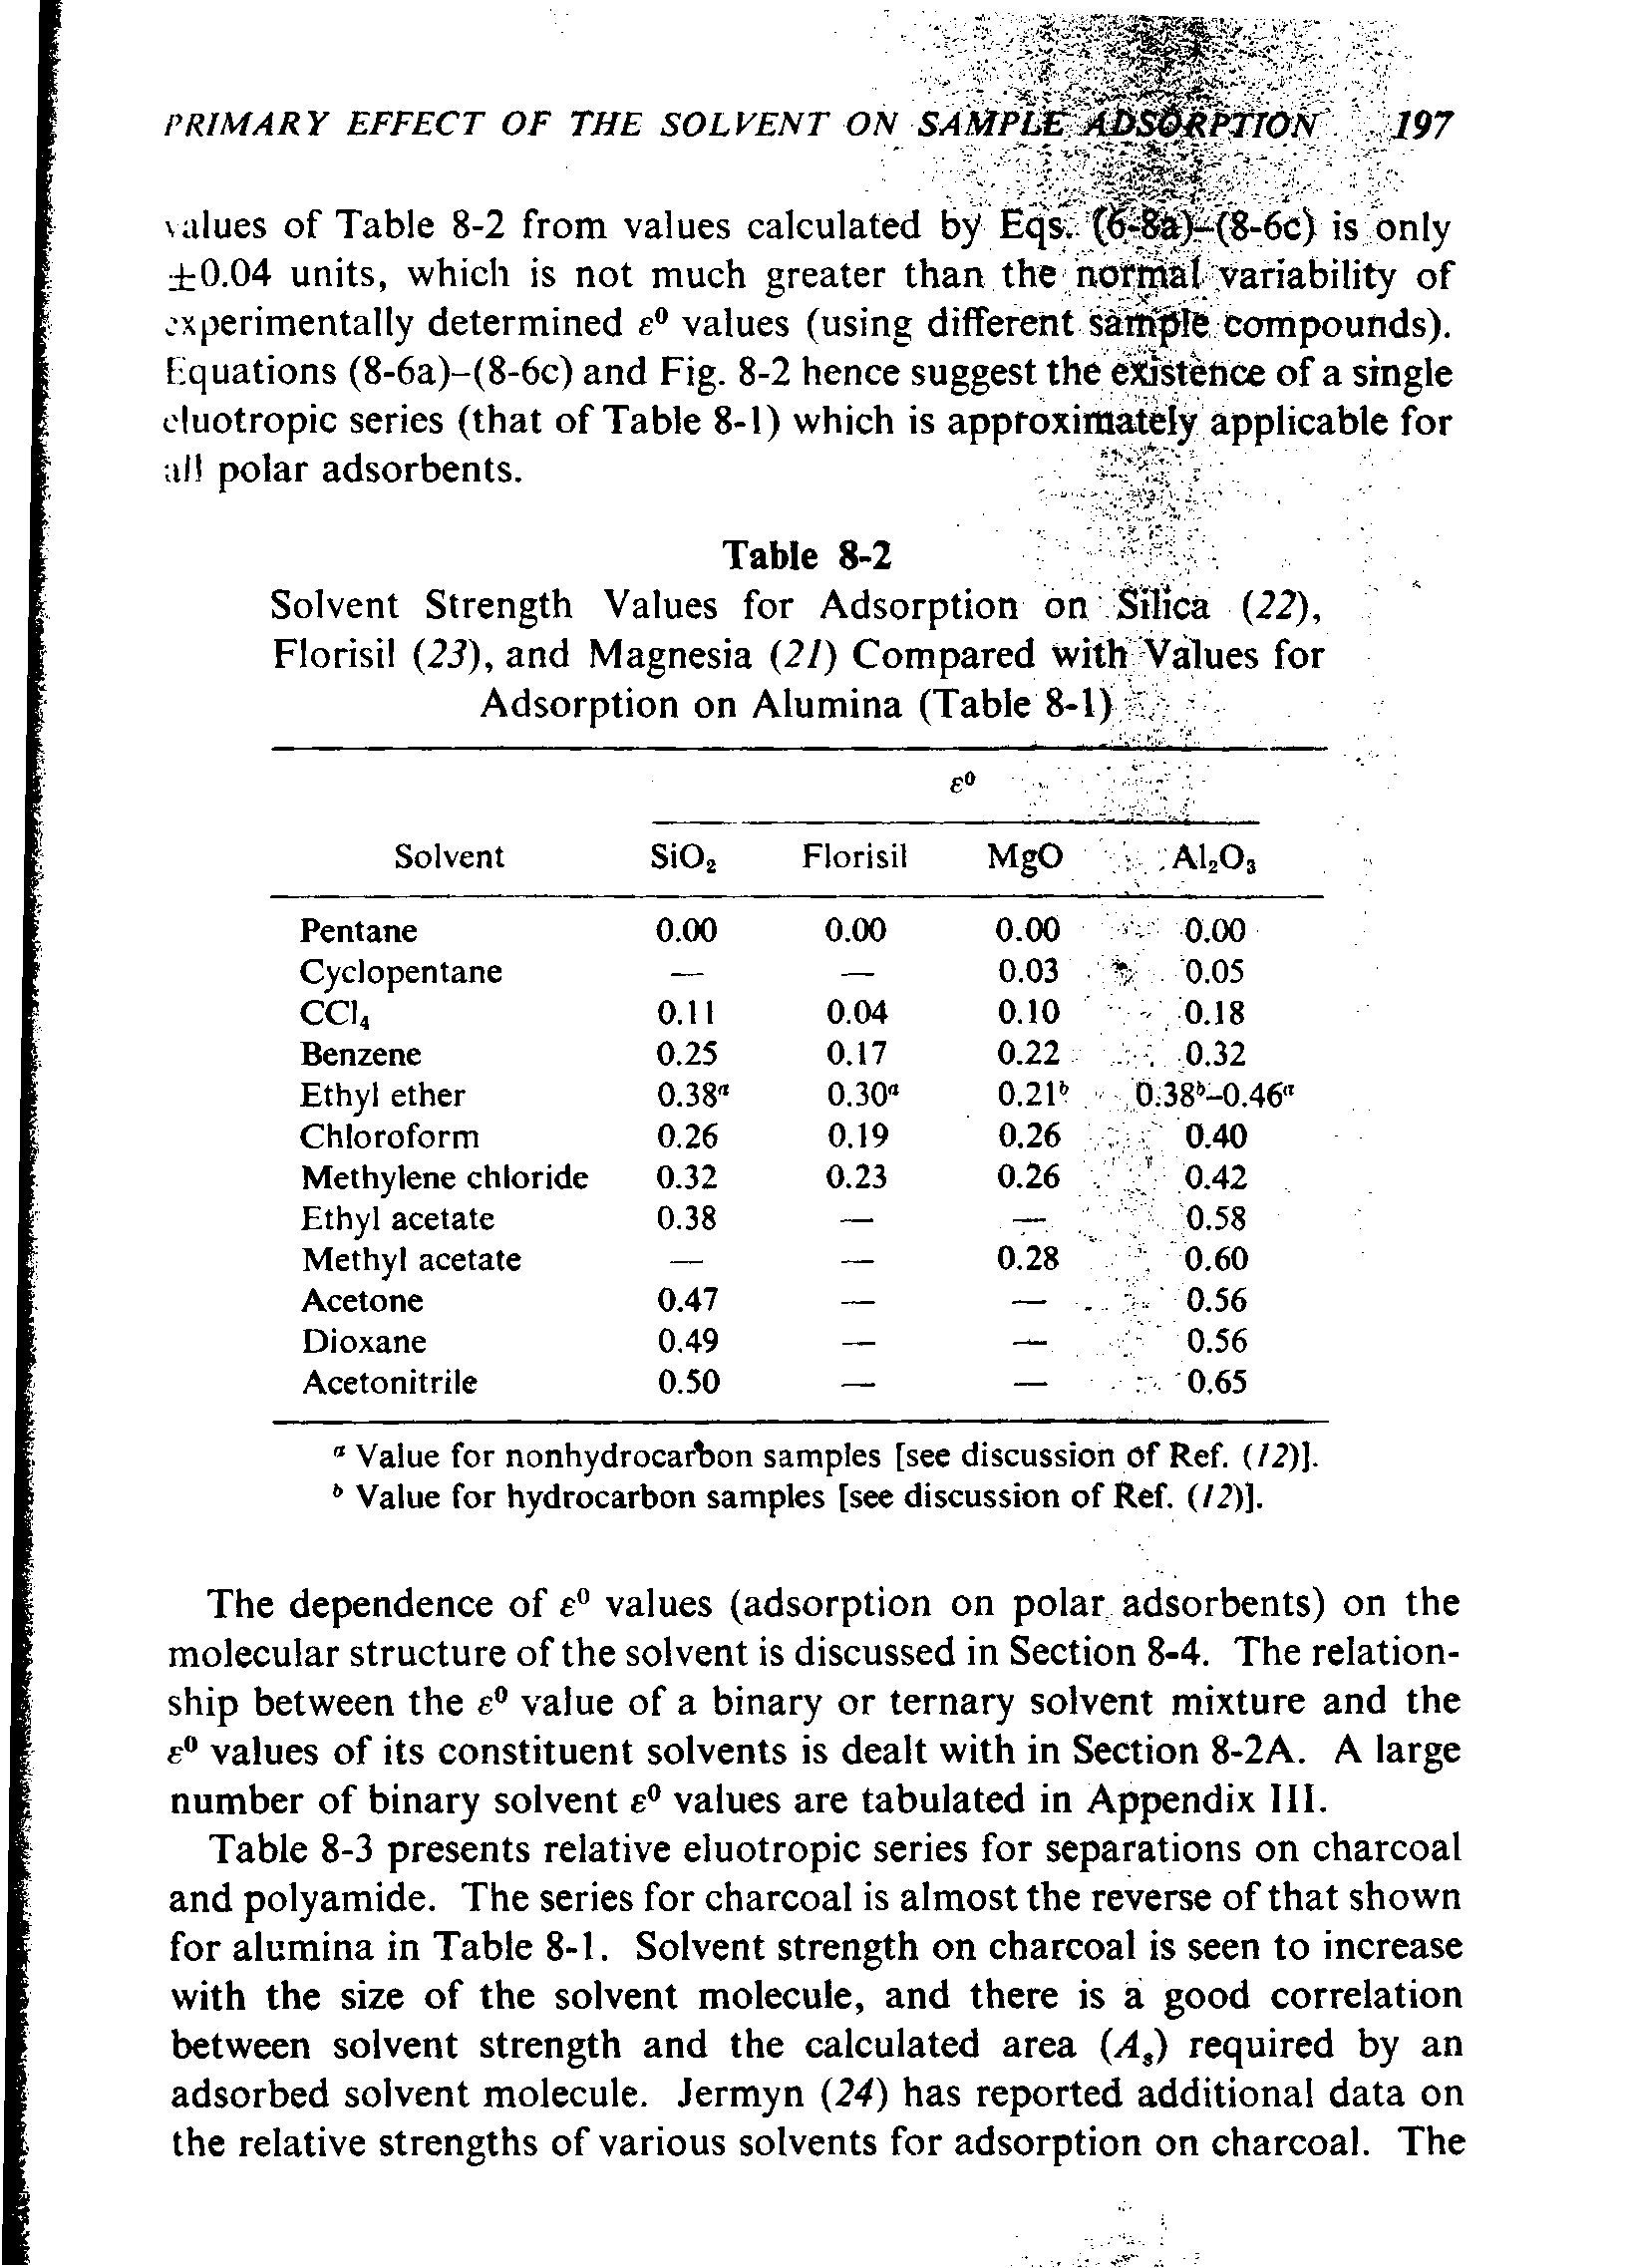 Table 8-3 presents relative eluotropic series for separations on charcoal and polyamide. The series for charcoal is almost the reverse of that shown for alumina in Table 8-1. Solvent strength on charcoal is seen to increase with the size of the solvent molecule, and there is a good correlation between solvent strength and the calculated area (A,) required by an adsorbed solvent molecule. Jermyn (24) has reported additional data on the relative strengths of various solvents for adsorption on charcoal. The...